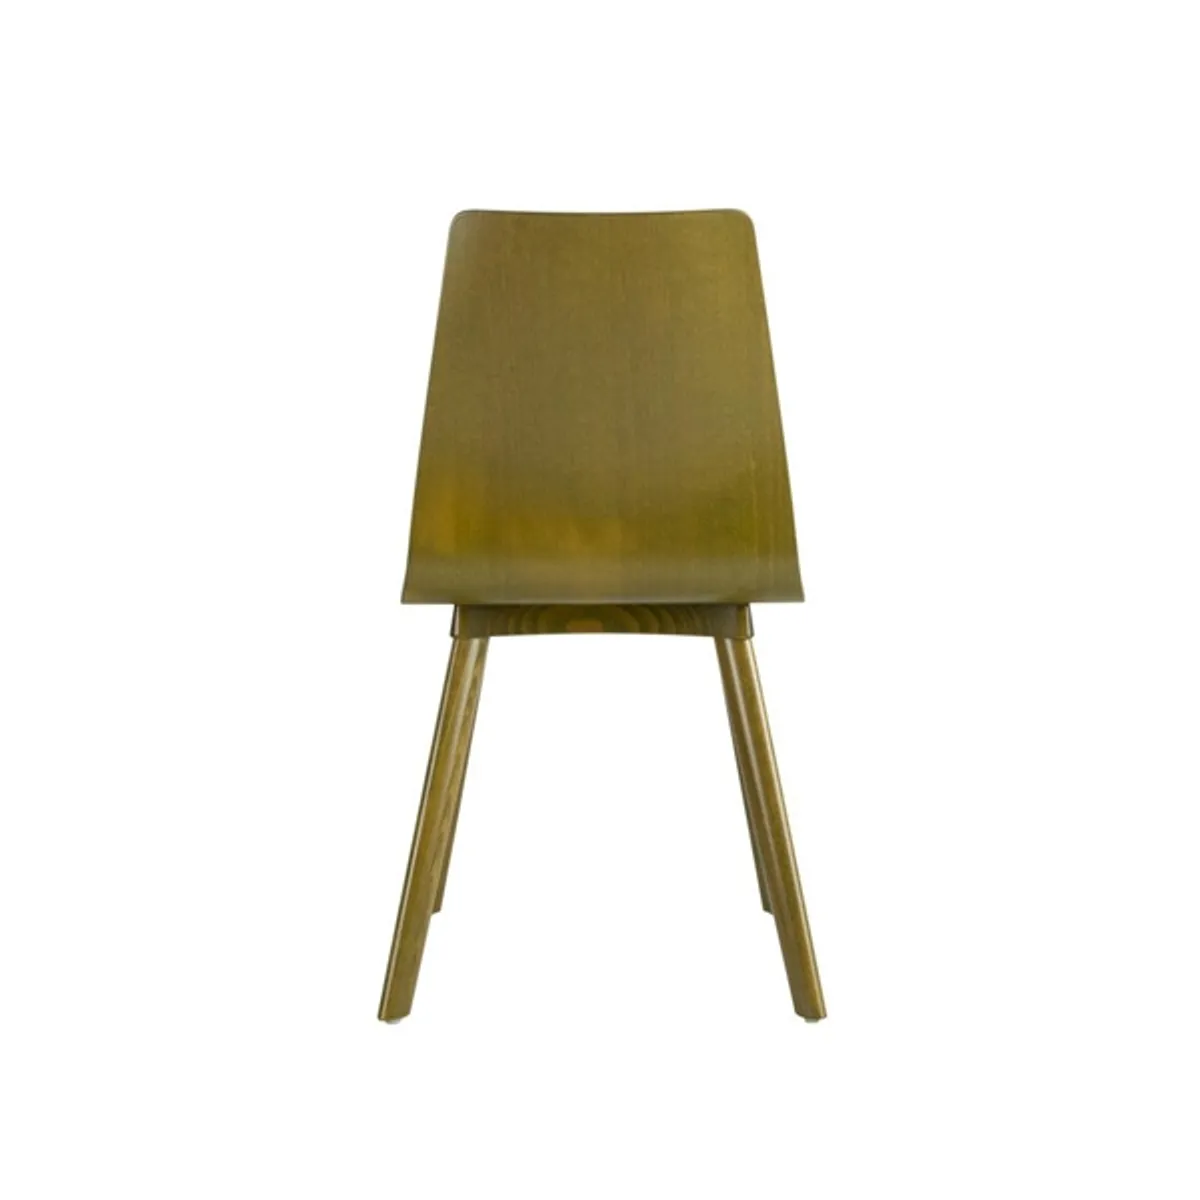 Allendale wood side chair Inside Out Contracts2